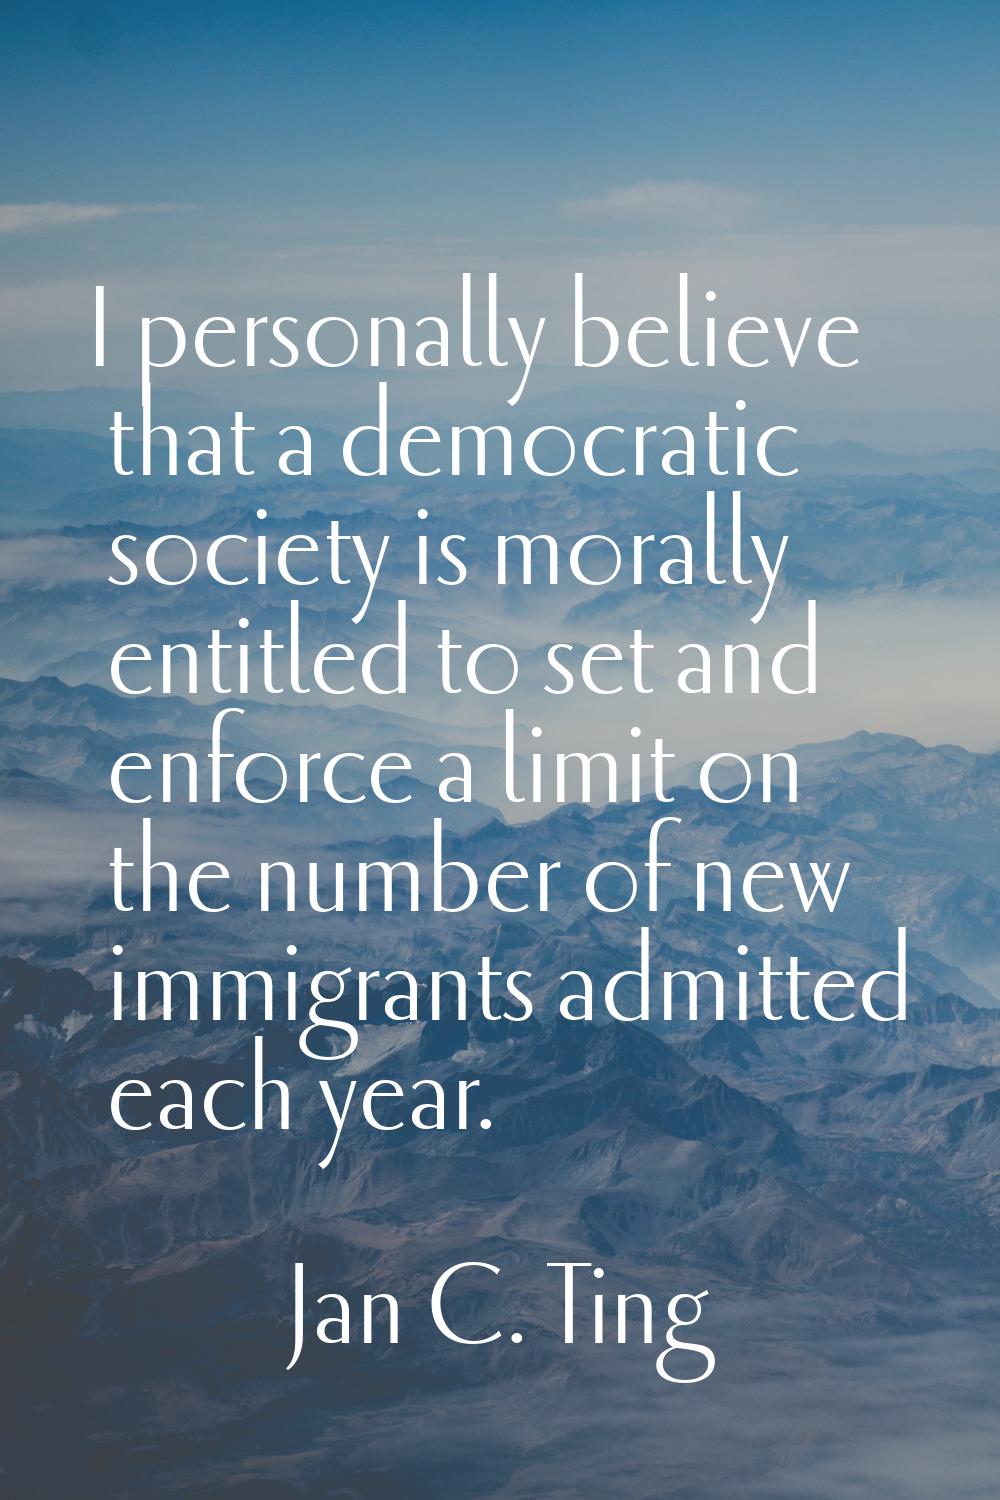 I personally believe that a democratic society is morally entitled to set and enforce a limit on th